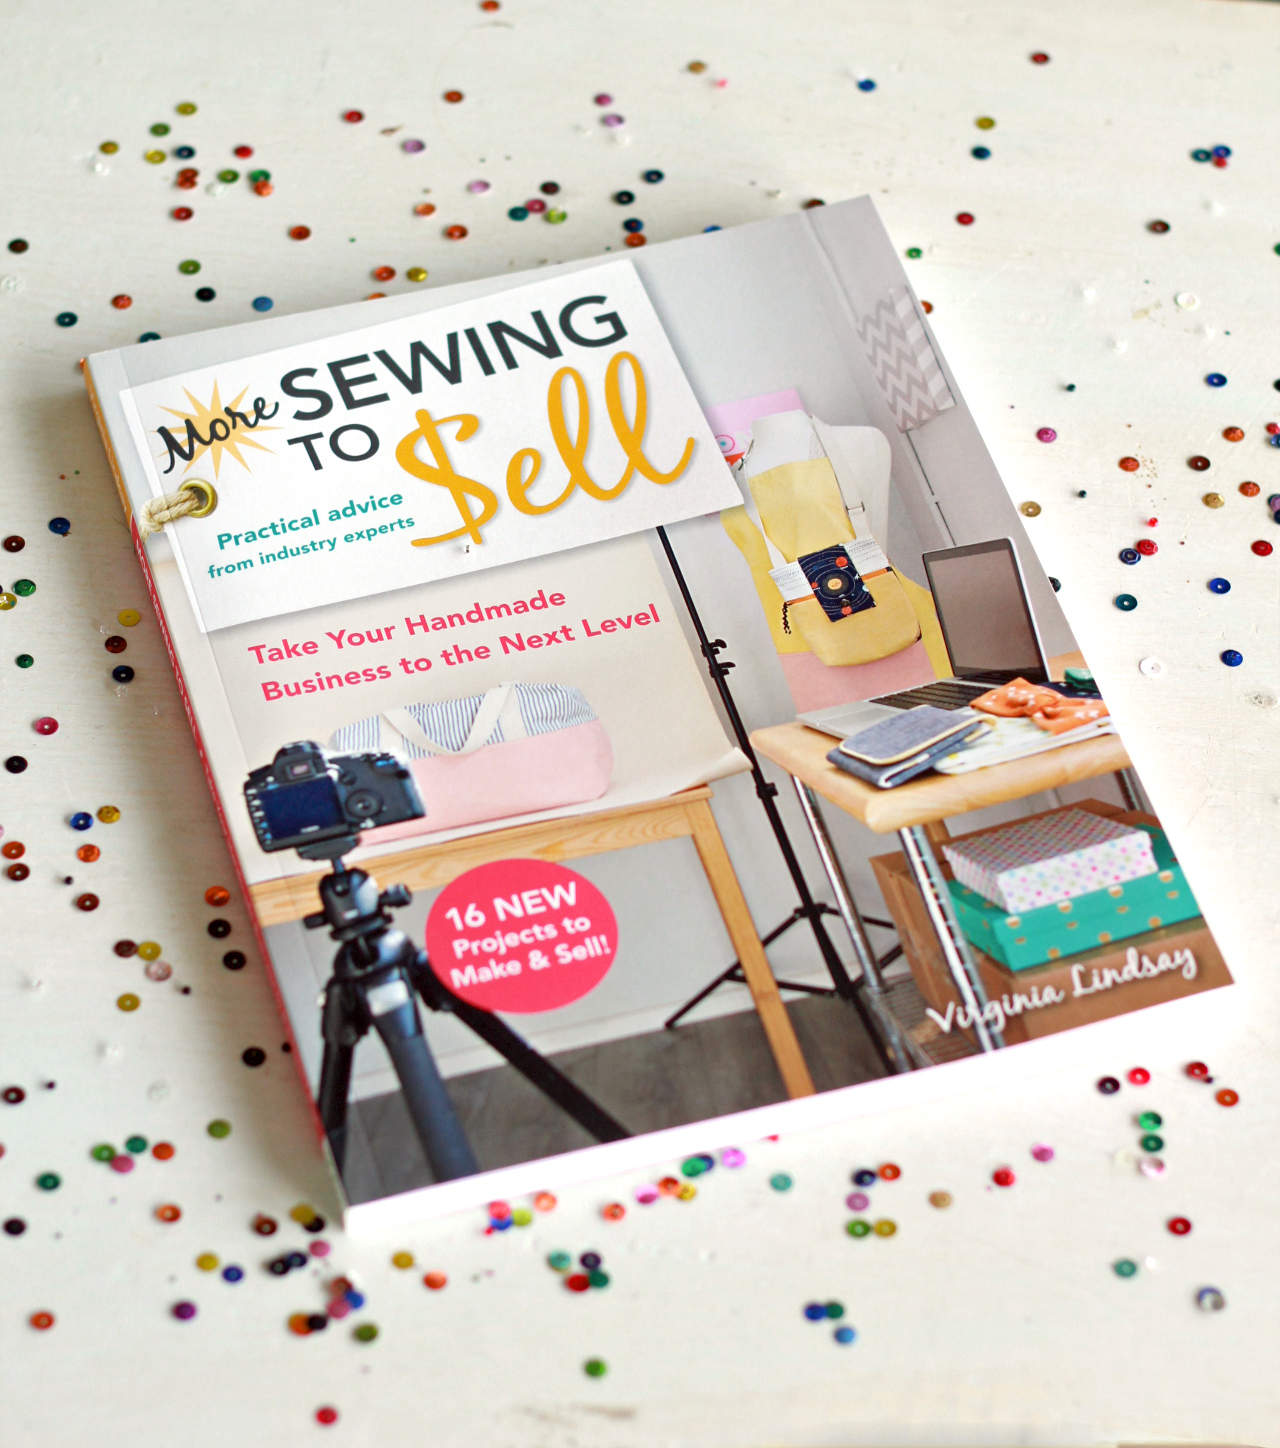 16 New Projects to Make & Sell! More Sewing to Sell―Take Your Handmade Business to the Next Level